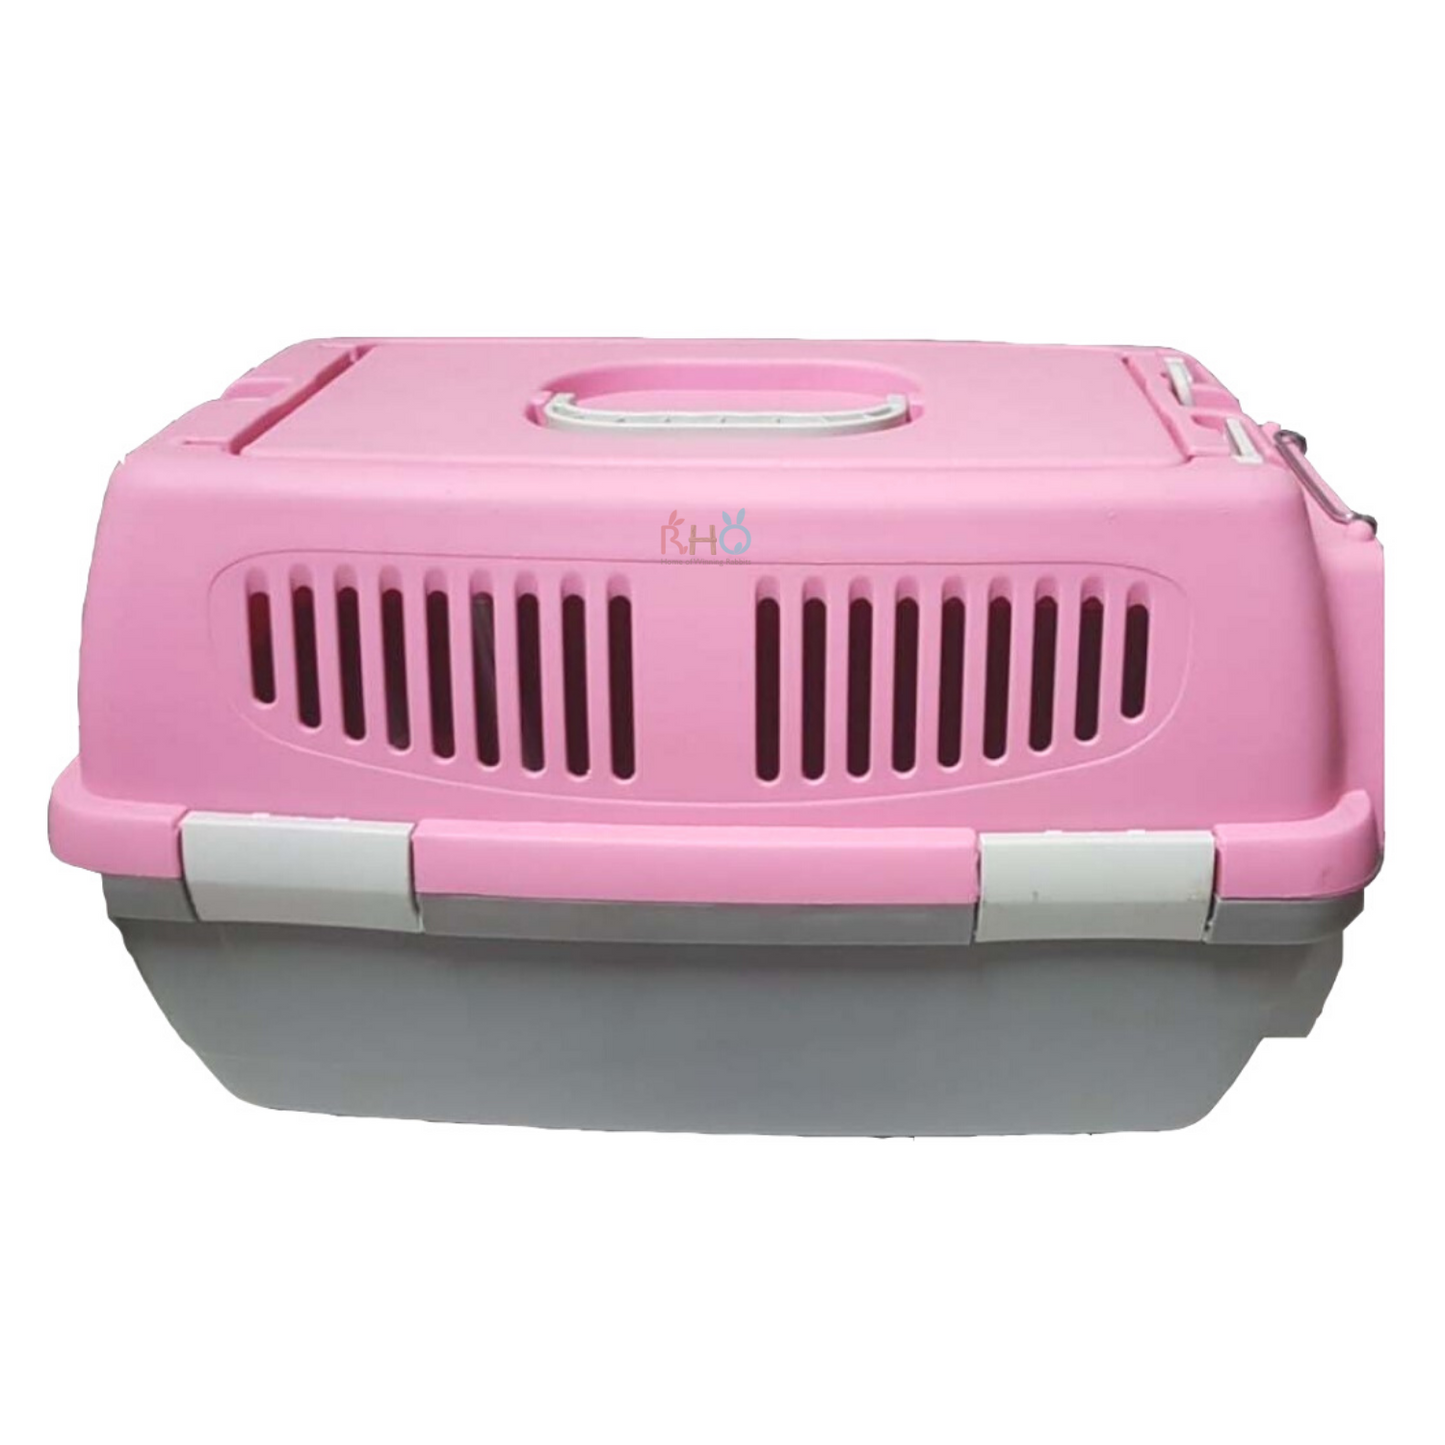 Small Foot Pet Carrier (Pink)